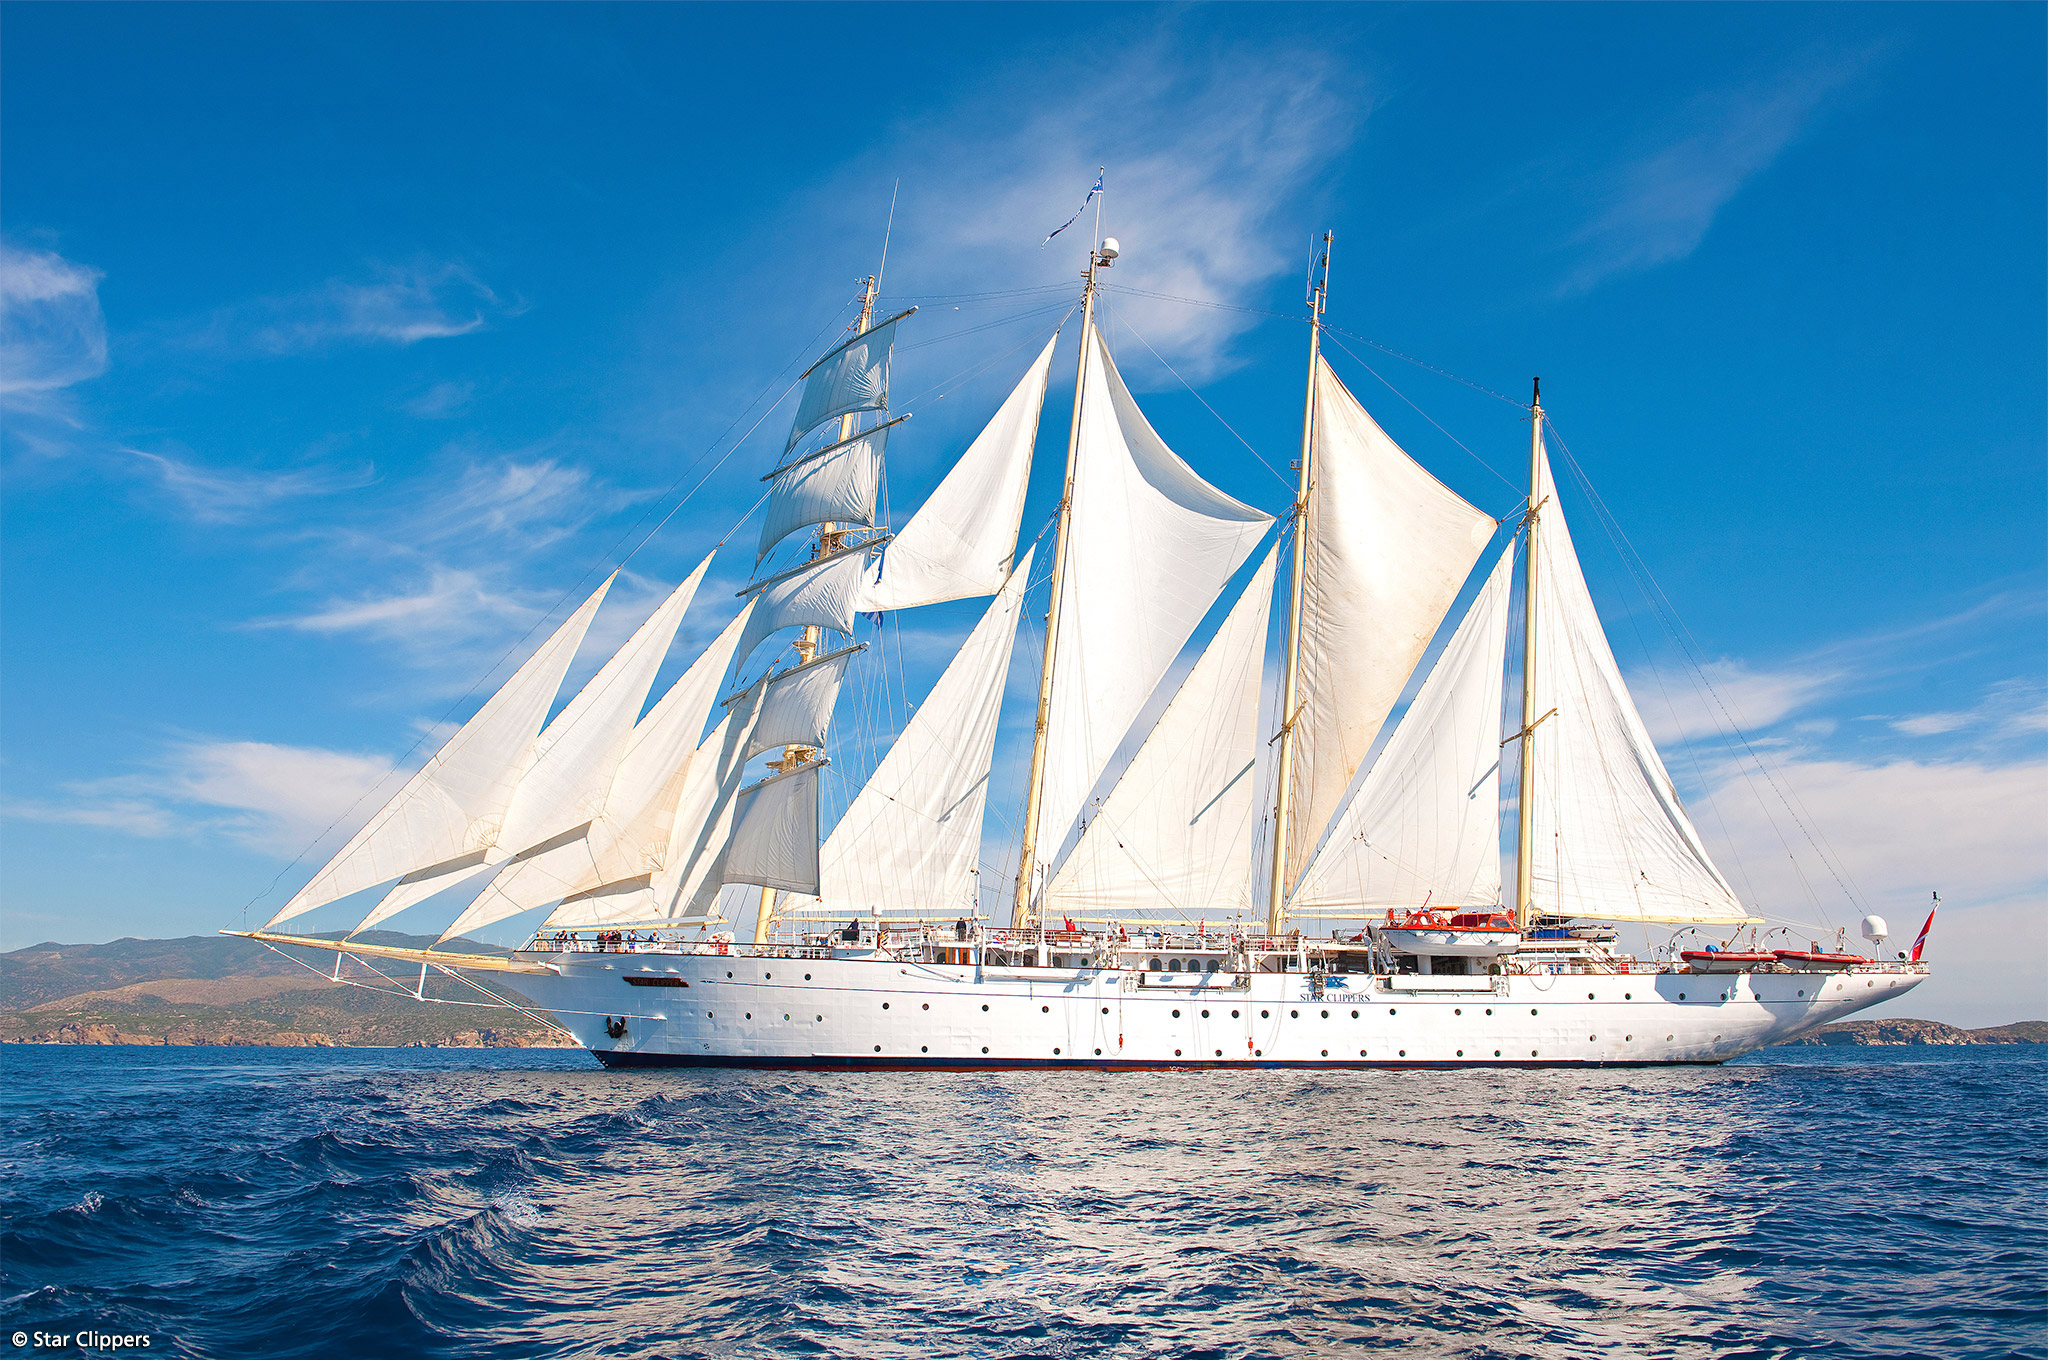 star clippers cruises careers